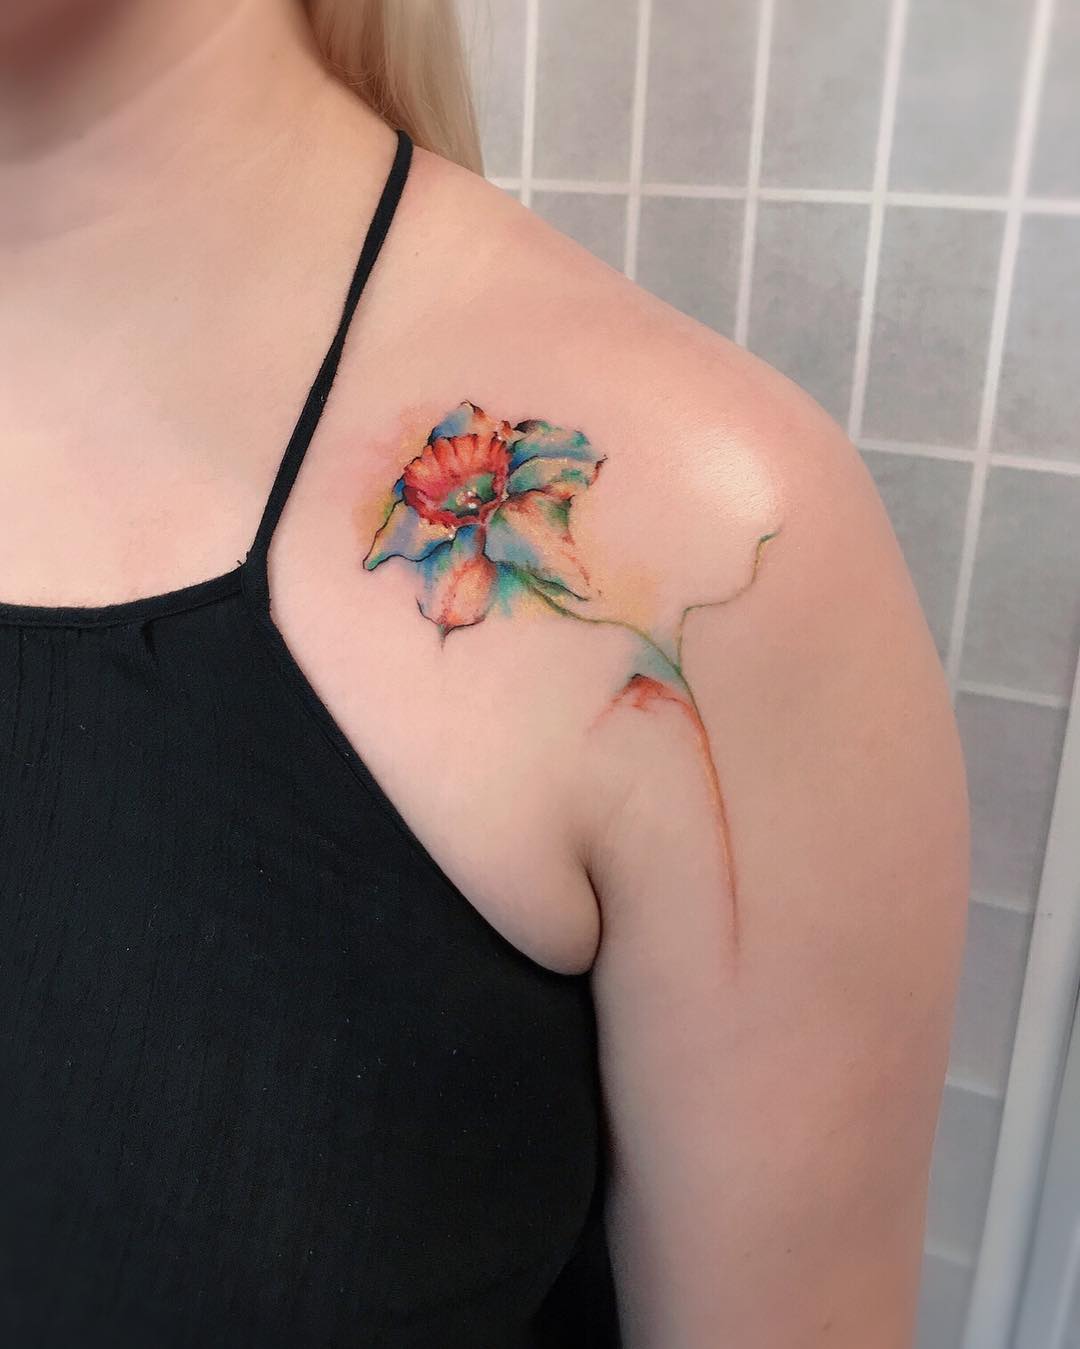 Get Inspired: 50+ Classy Shoulder Tattoo Designs For Female